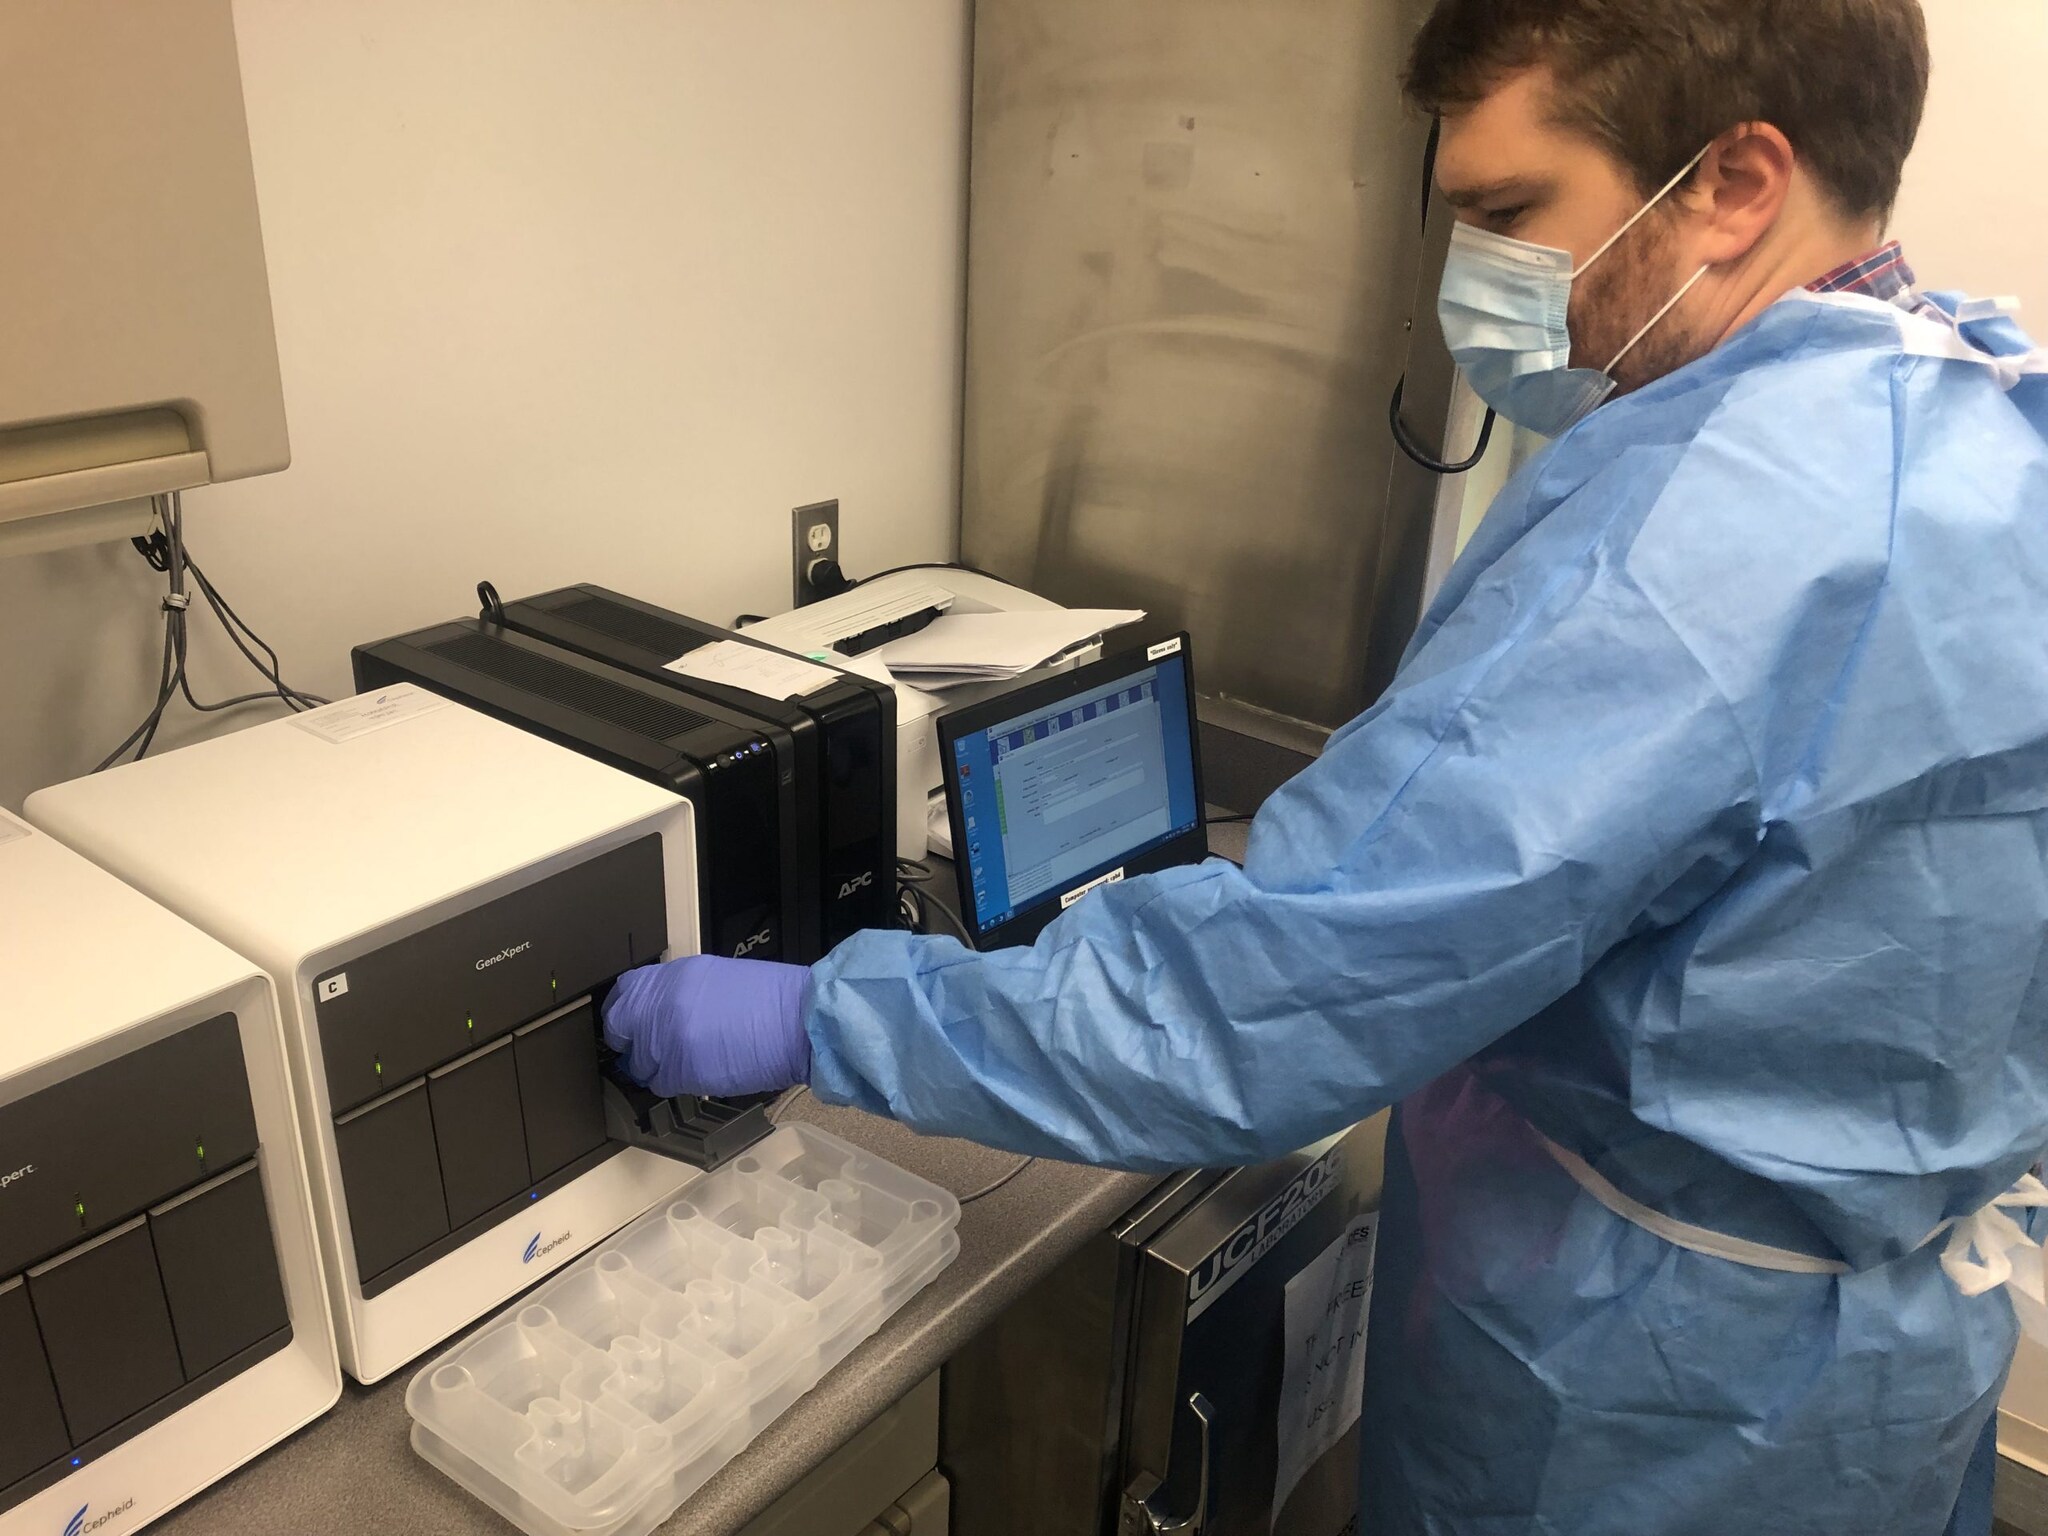 LLS Fellow David Payne installs Point of Care testing instruments on a Mobile Testing Unit (MTU) in July 2021.  The DC Public Health Laboratory uses the MTU to provide rapid, on-site COVID-19 testing to residents of Washington DC.